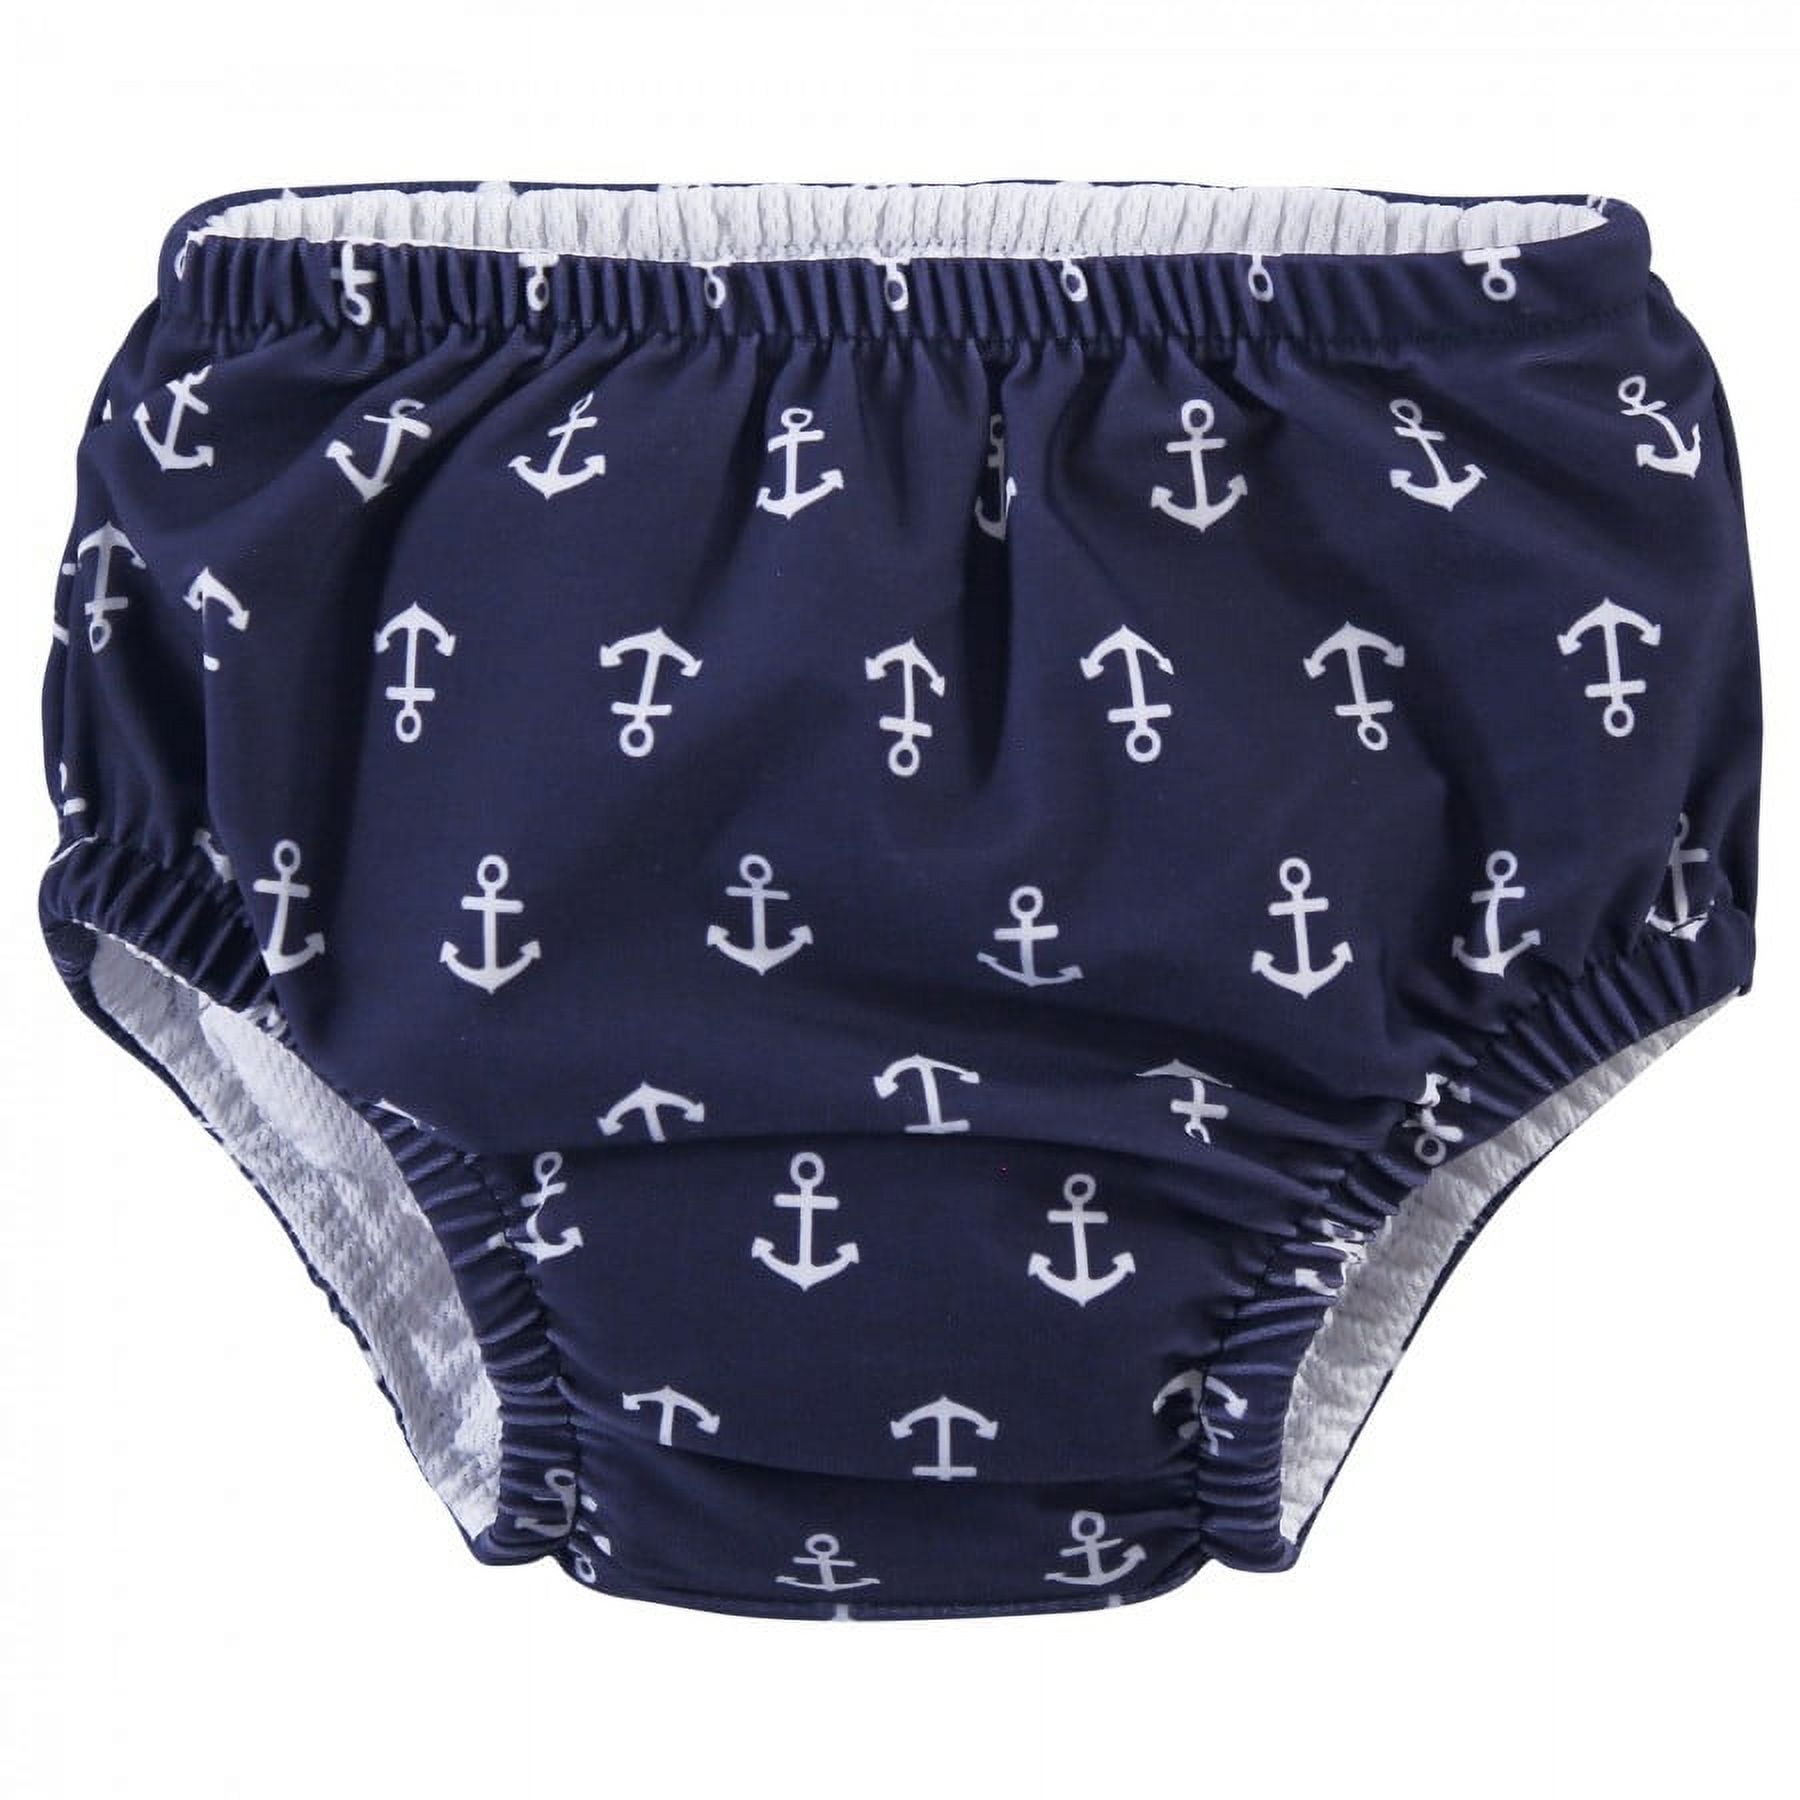 Hudson Baby Infant And Toddler Boy Swim Diapers, Anchors, 18-24